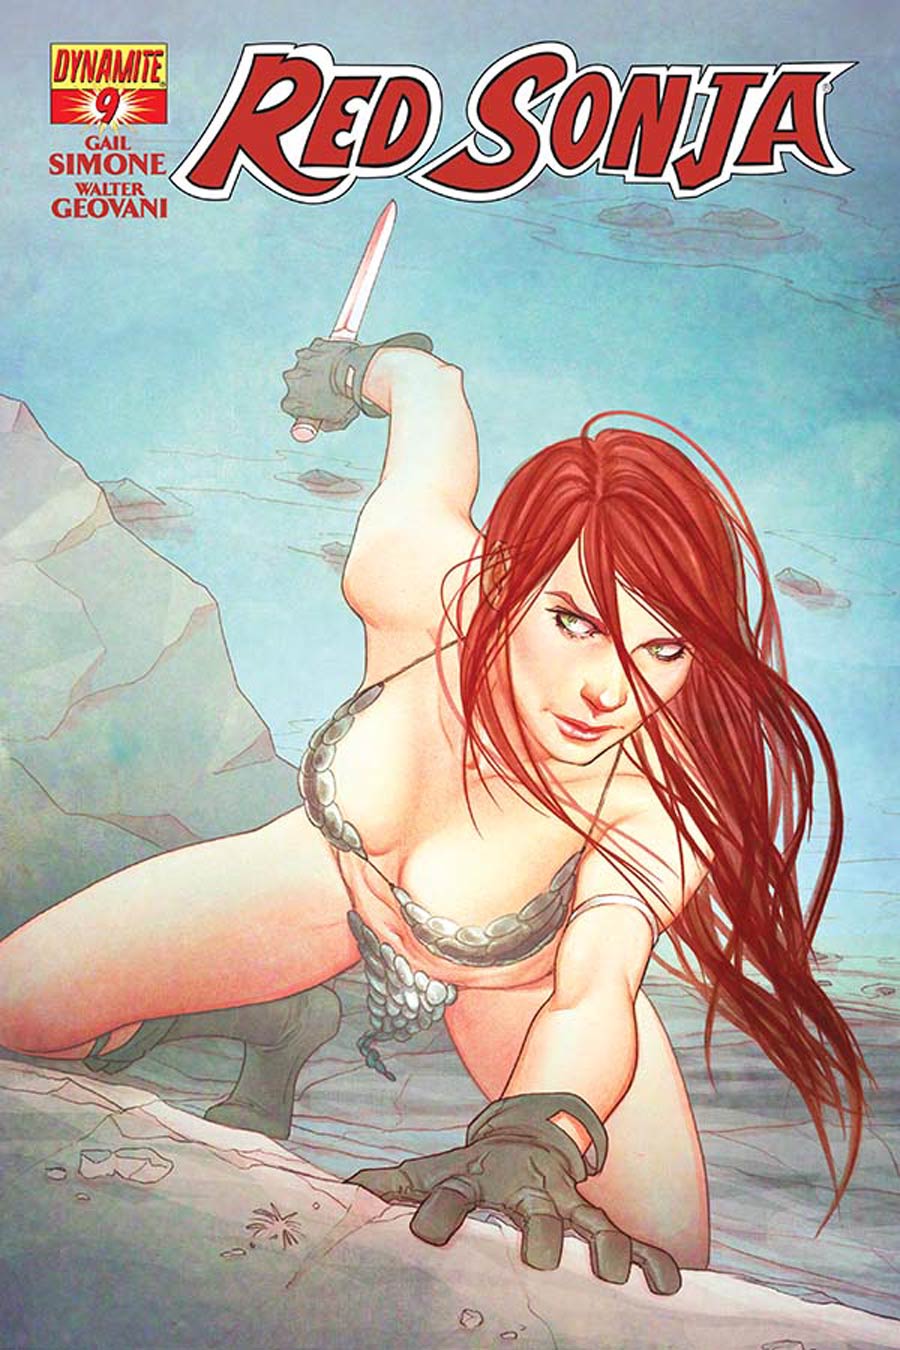 Red Sonja Vol 5 #9 Cover A Regular Jenny Frison Cover